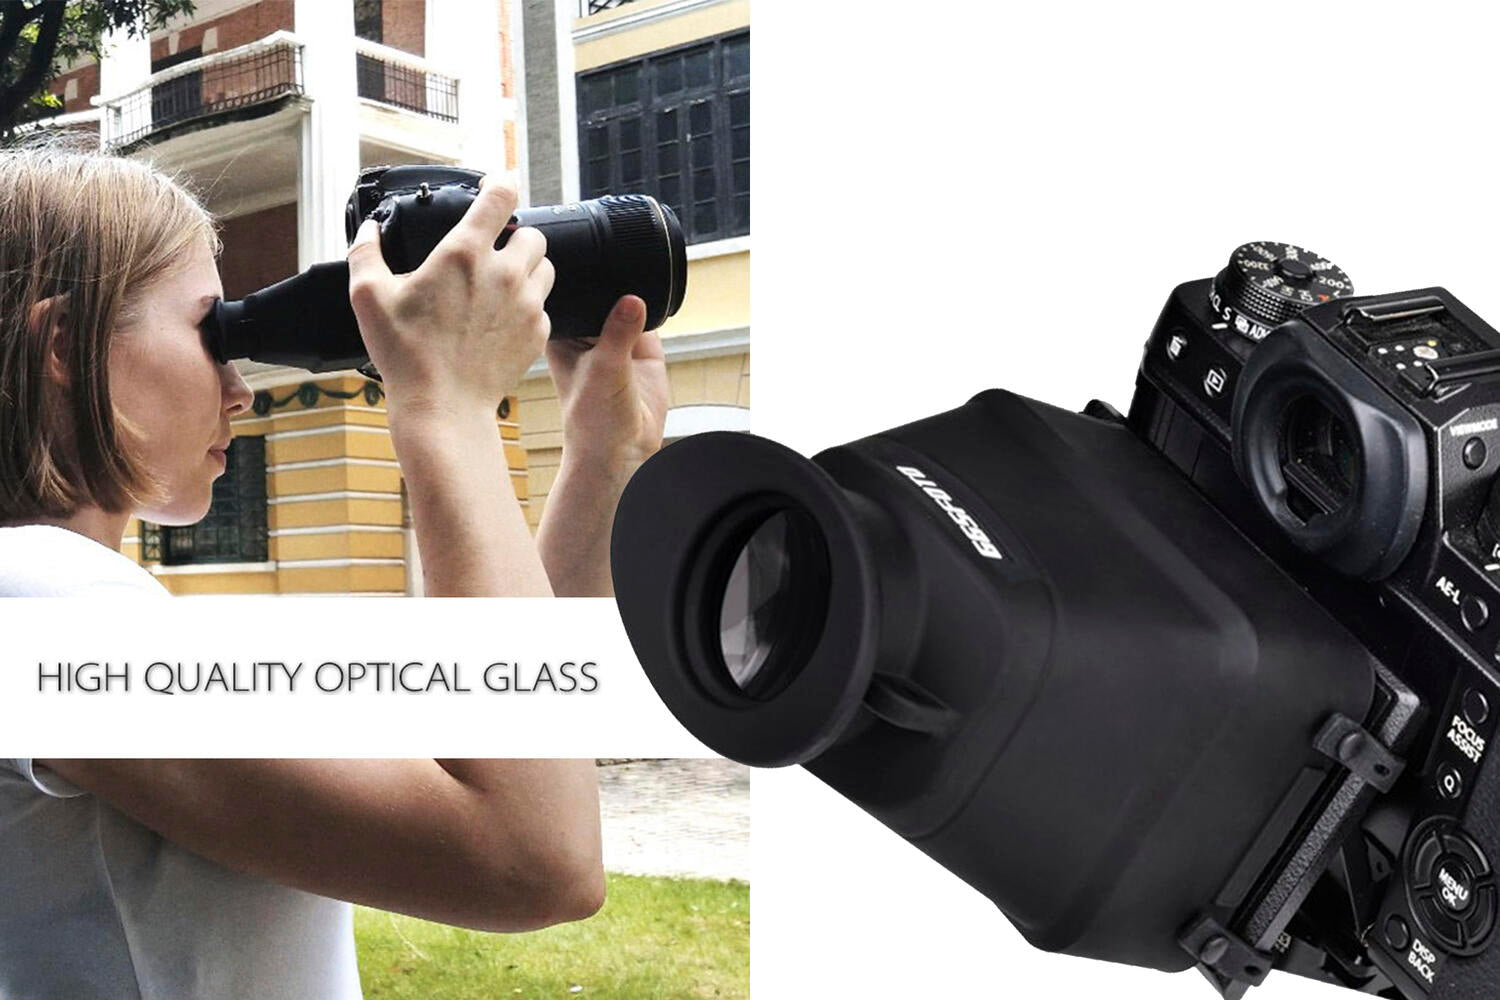 LCD Optical Viewfinder (S8)